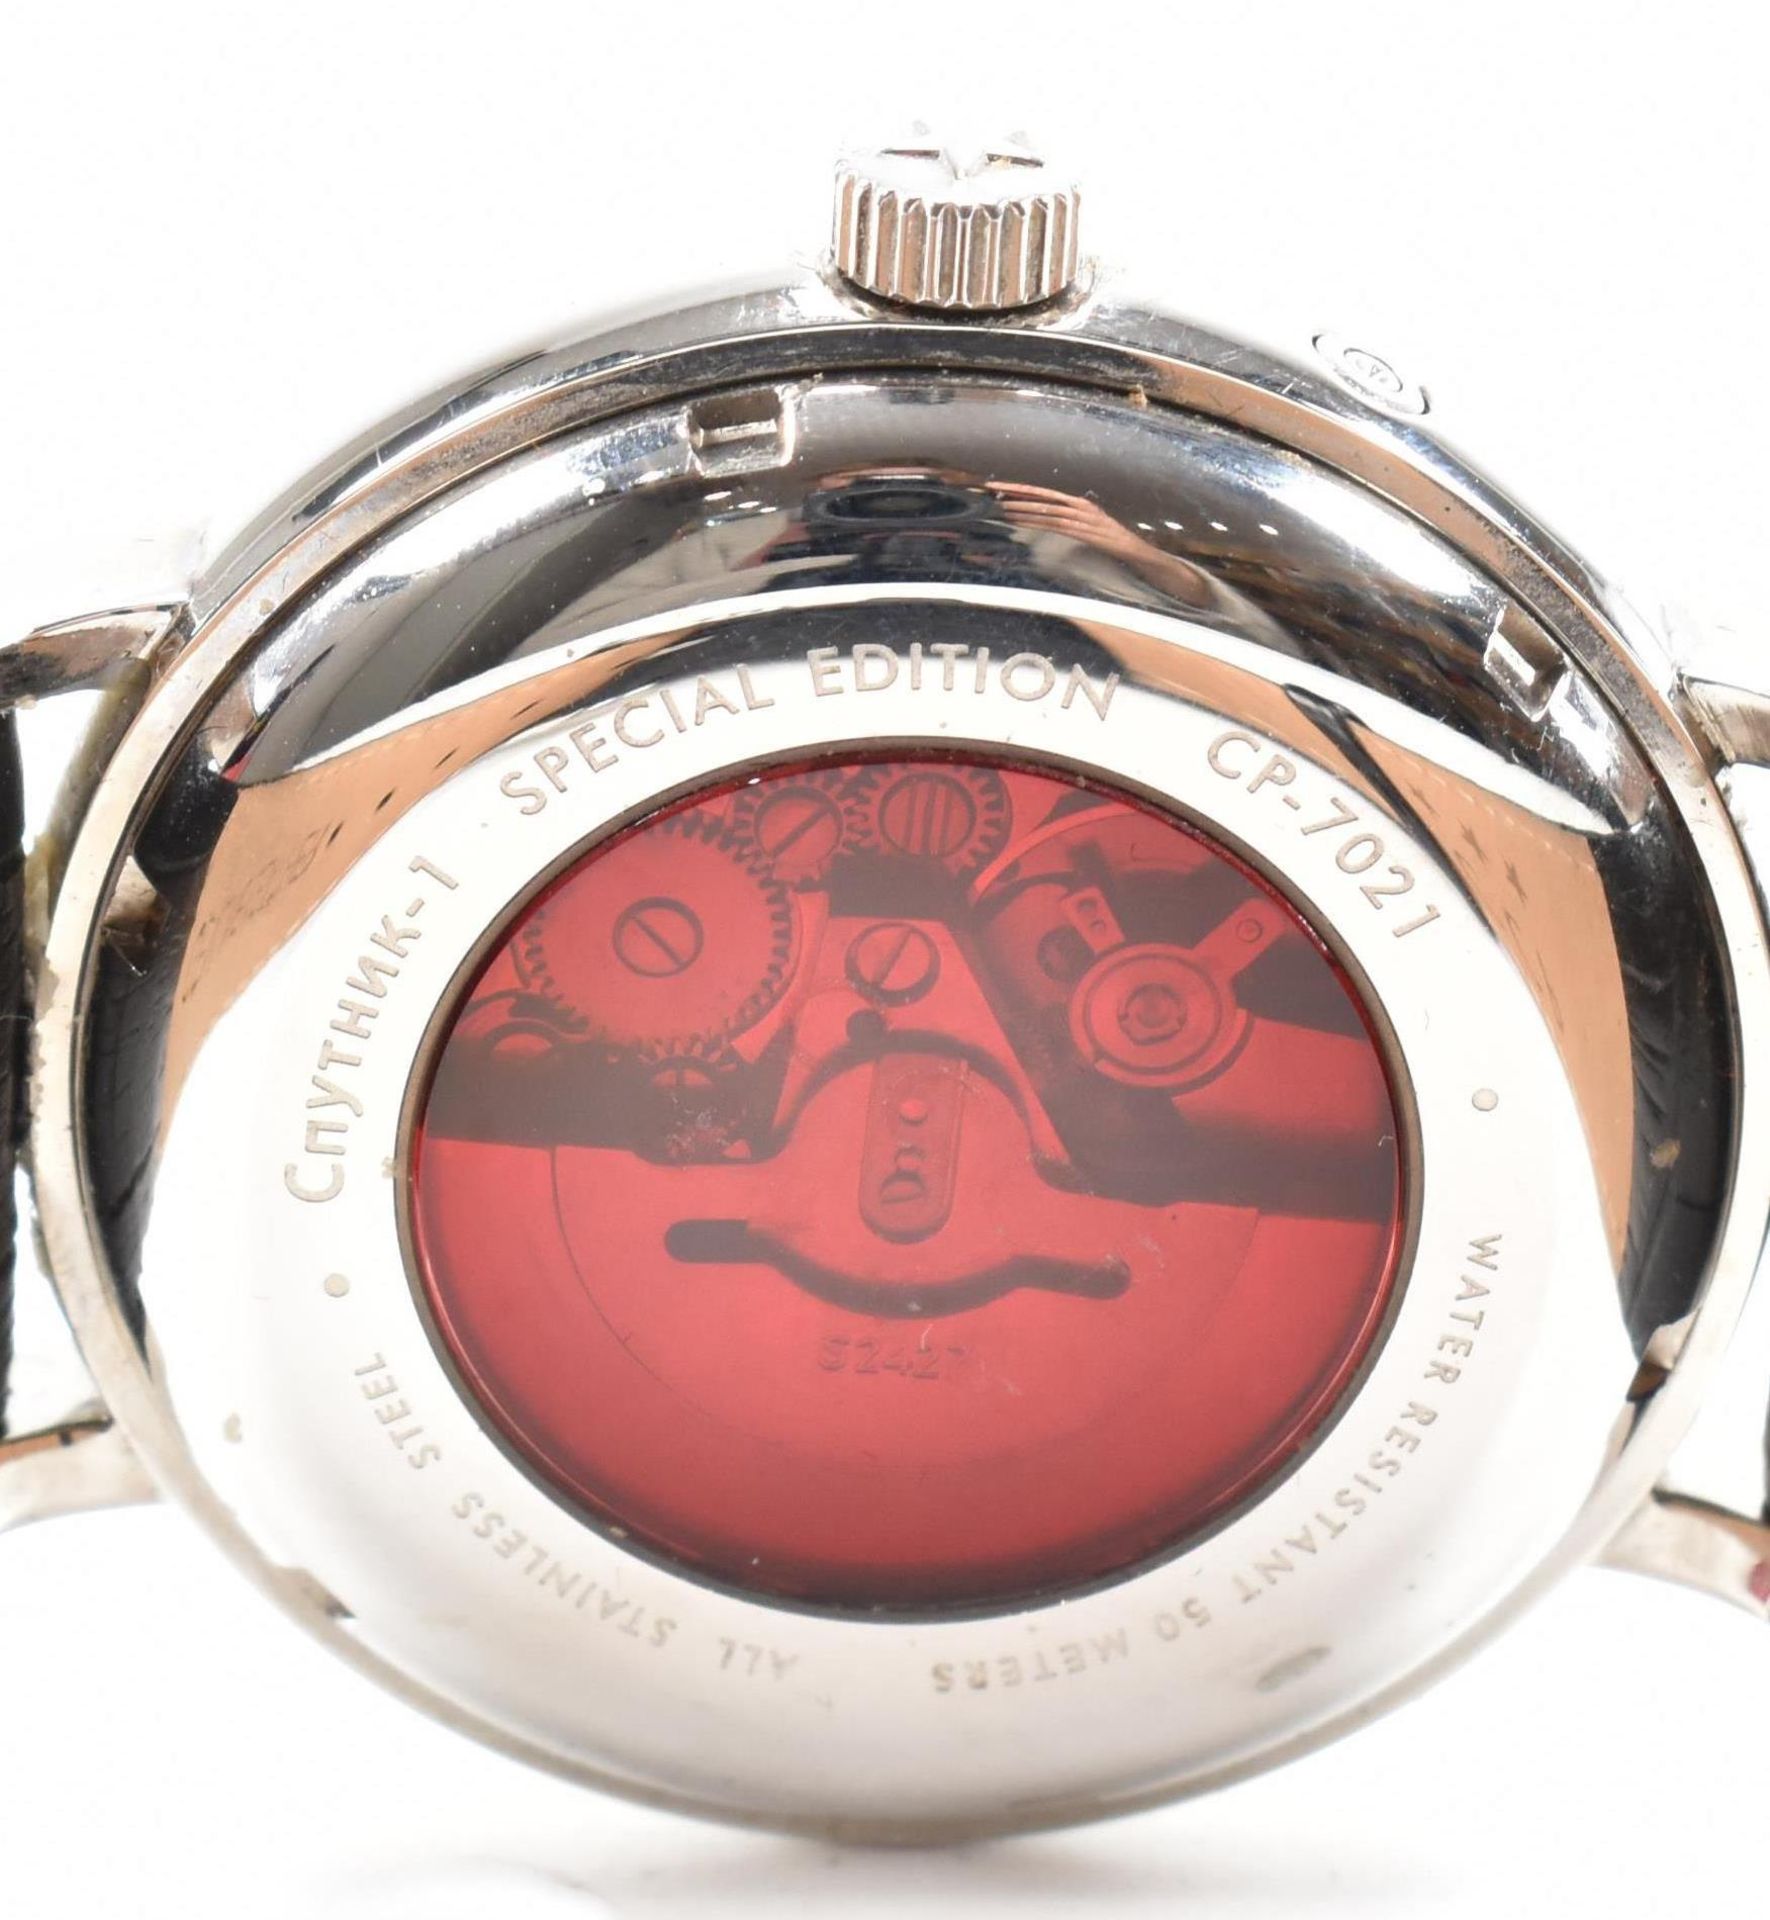 CCCP AUTOMATIC SPECIAL EDITION WATCH - Image 4 of 4